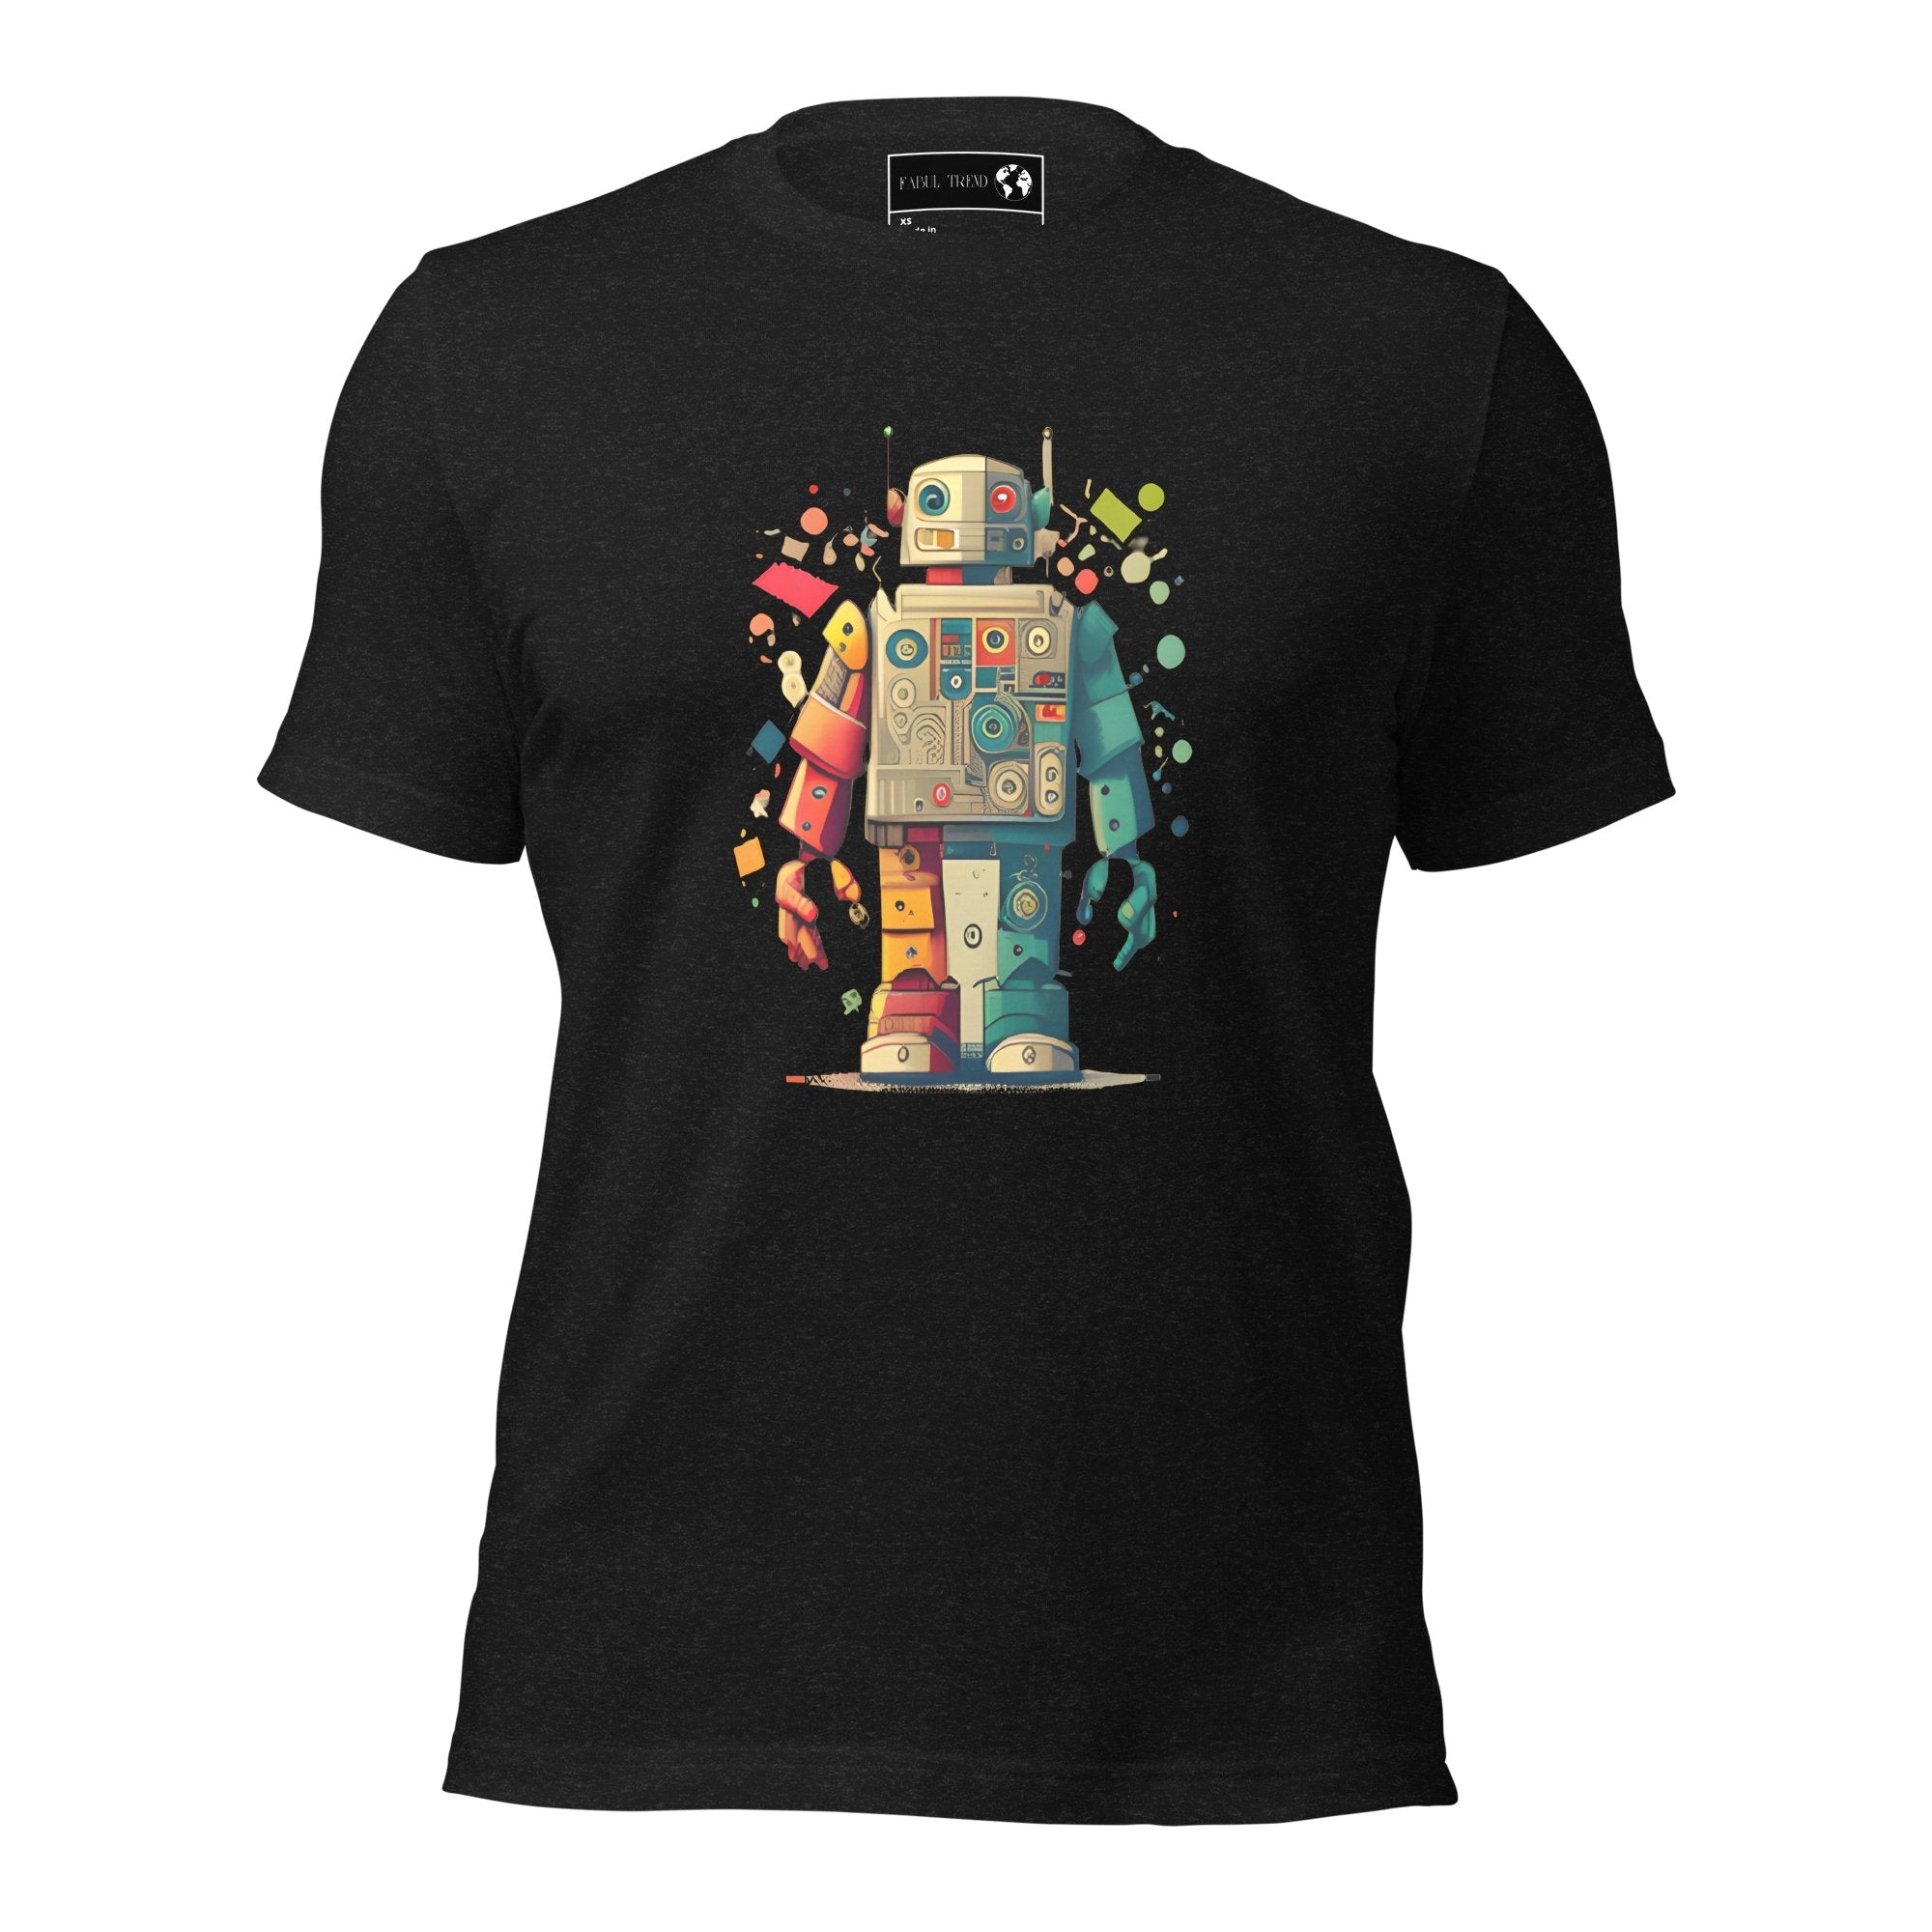 Unisex t-shirt with Robot design - FabulTrend